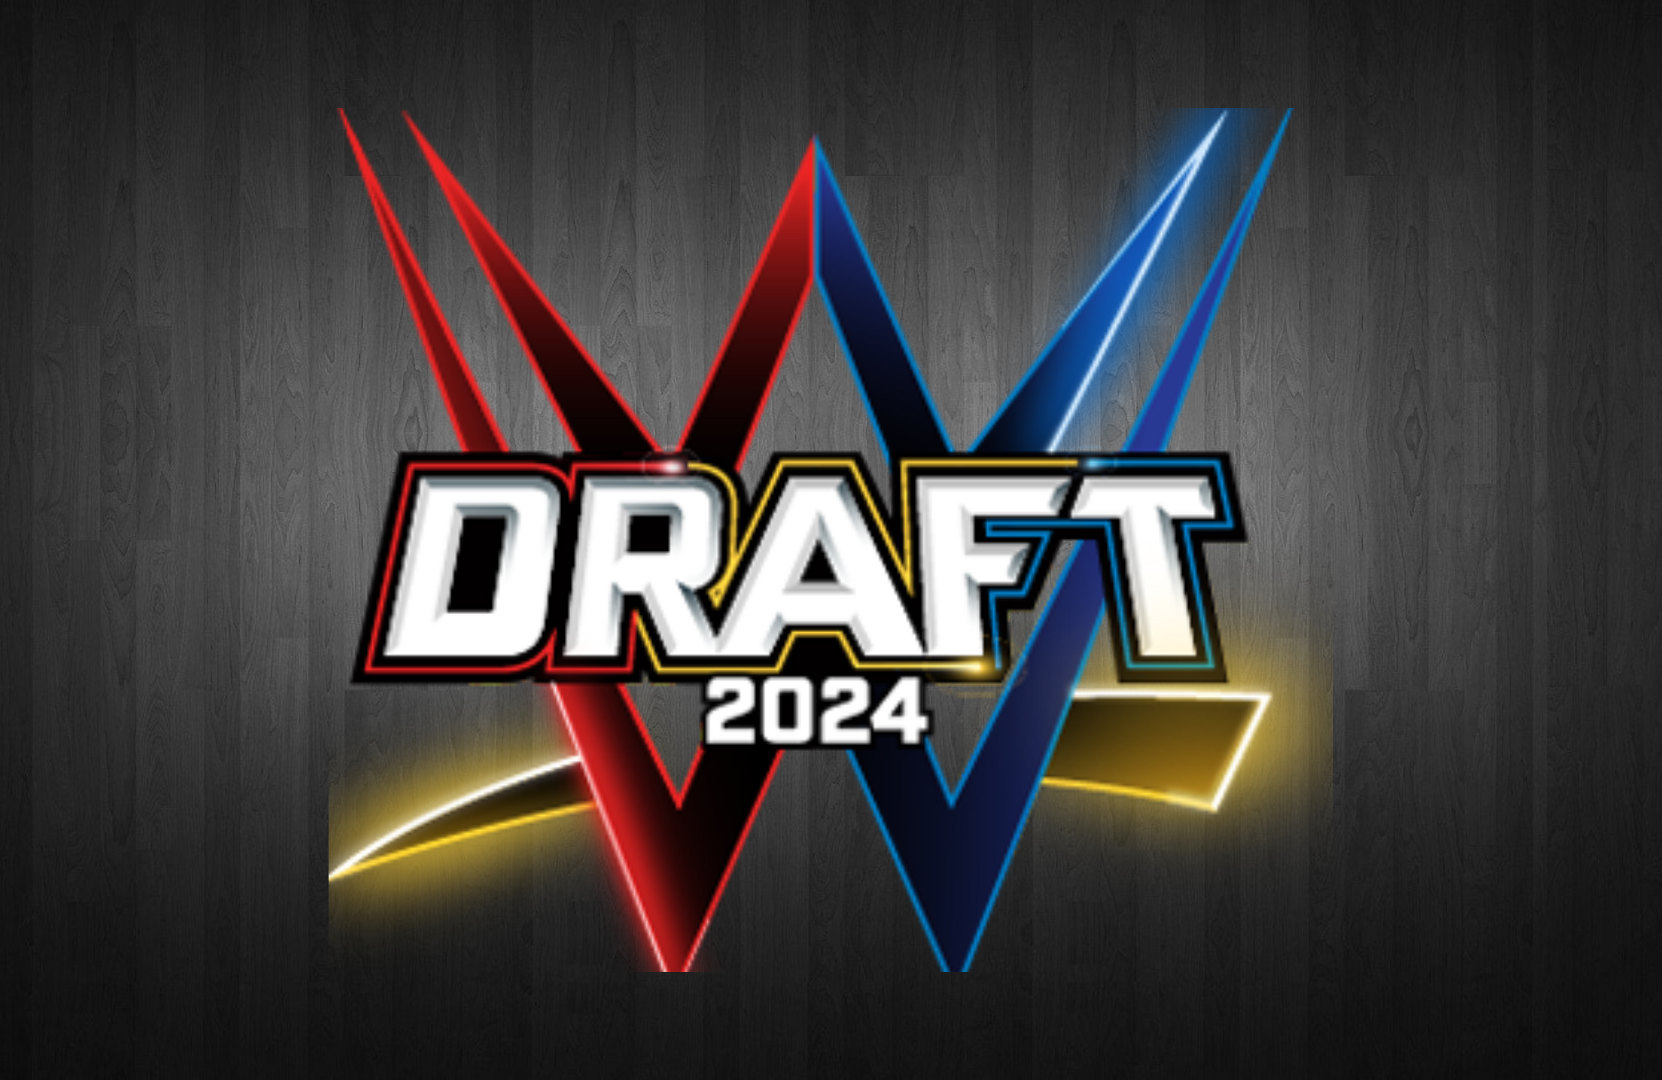 List of all eligible Superstars in 2024 WWE Draft pool; CM Punk, Roman